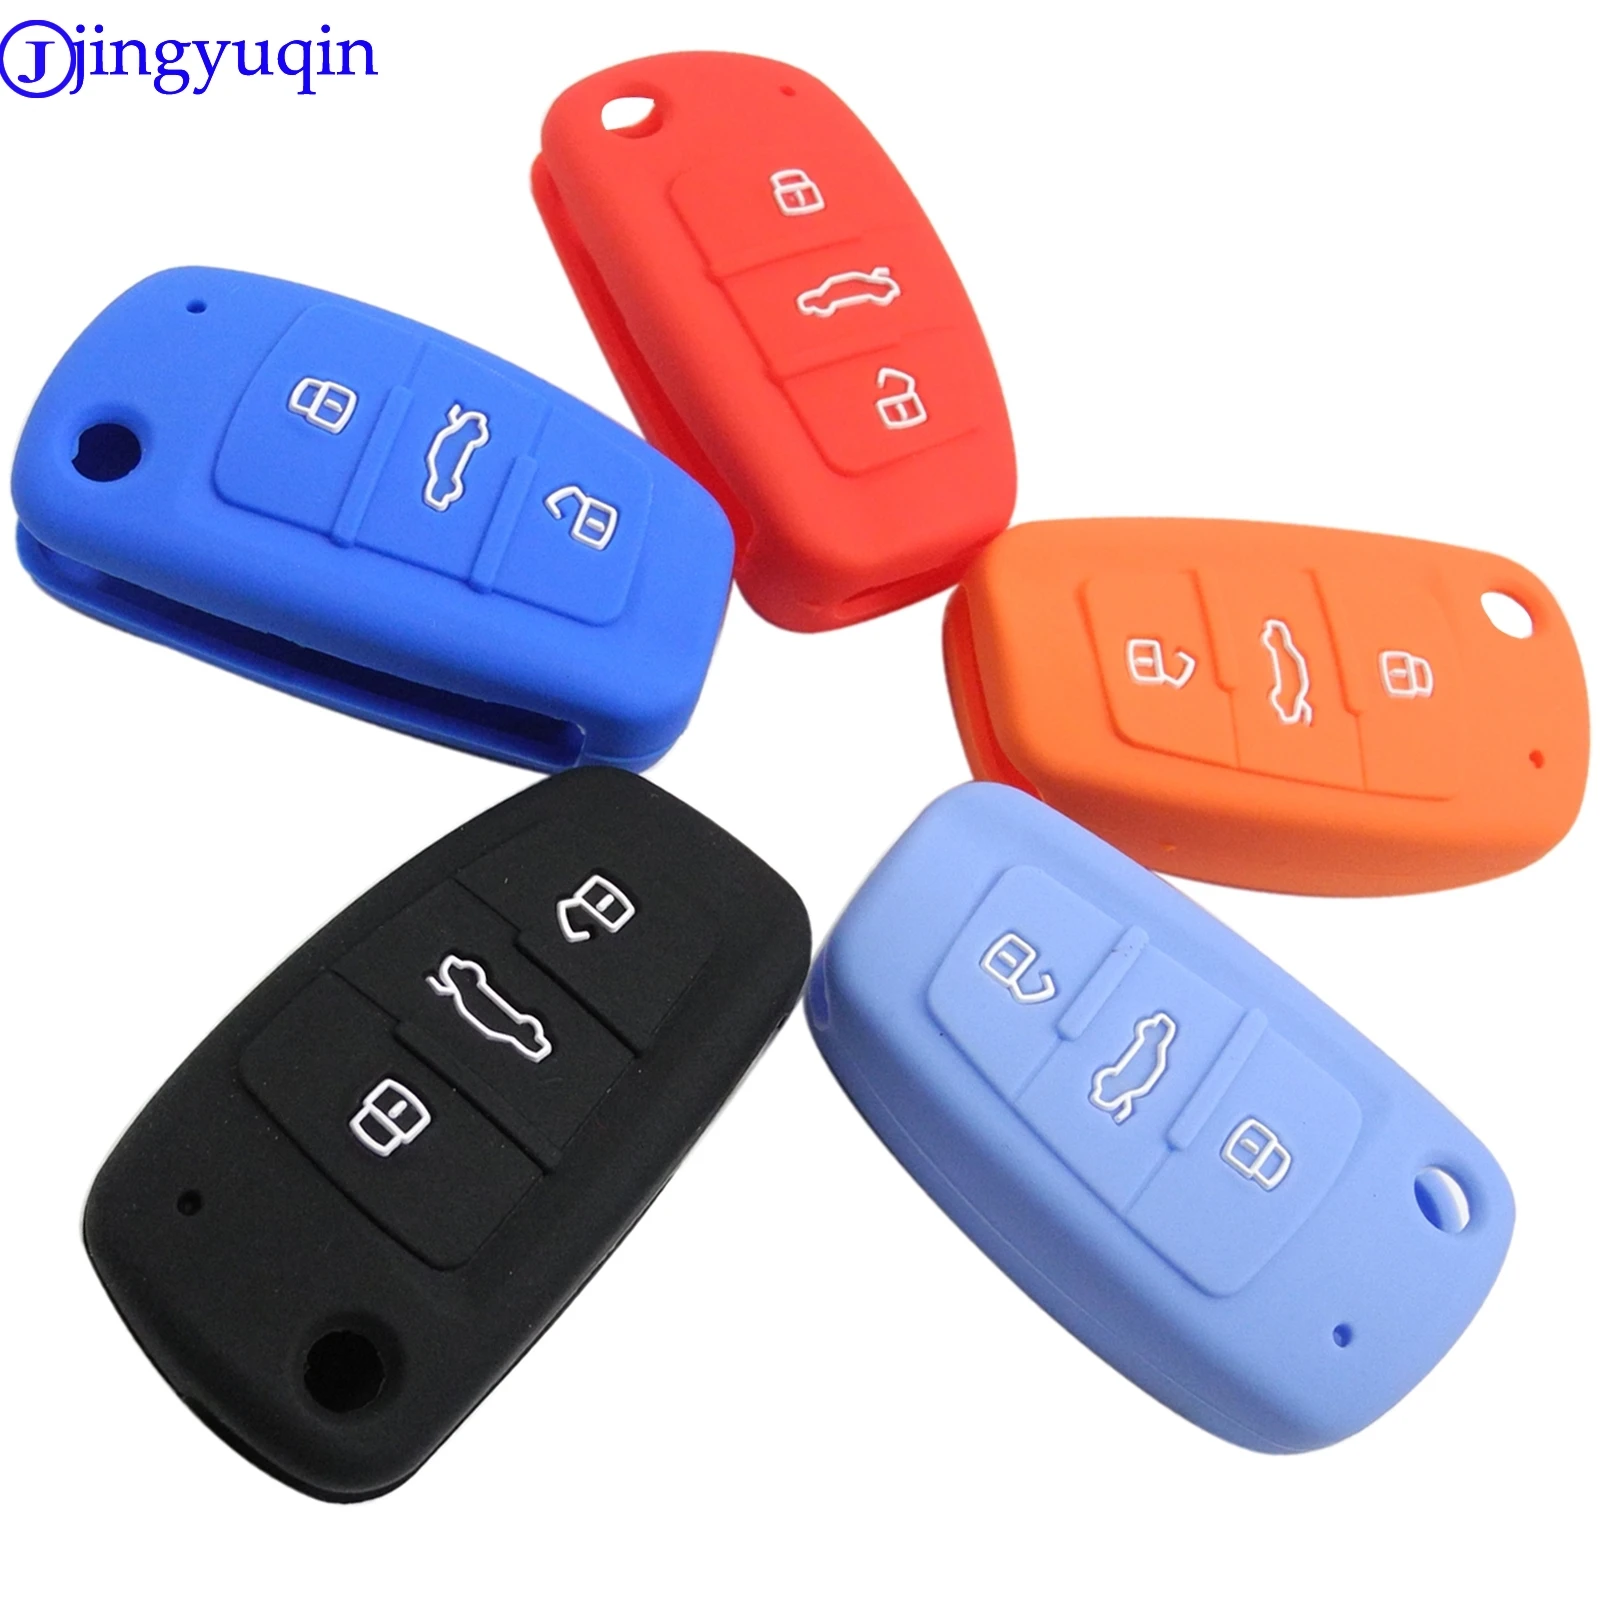 

jingyuqin 3 Buttons Car Silicone Key Cover Styling Case Cover Fob Shell For Audi A1 A3 Q3 Q7 R8 A6L TT Key Case Four Car Styling